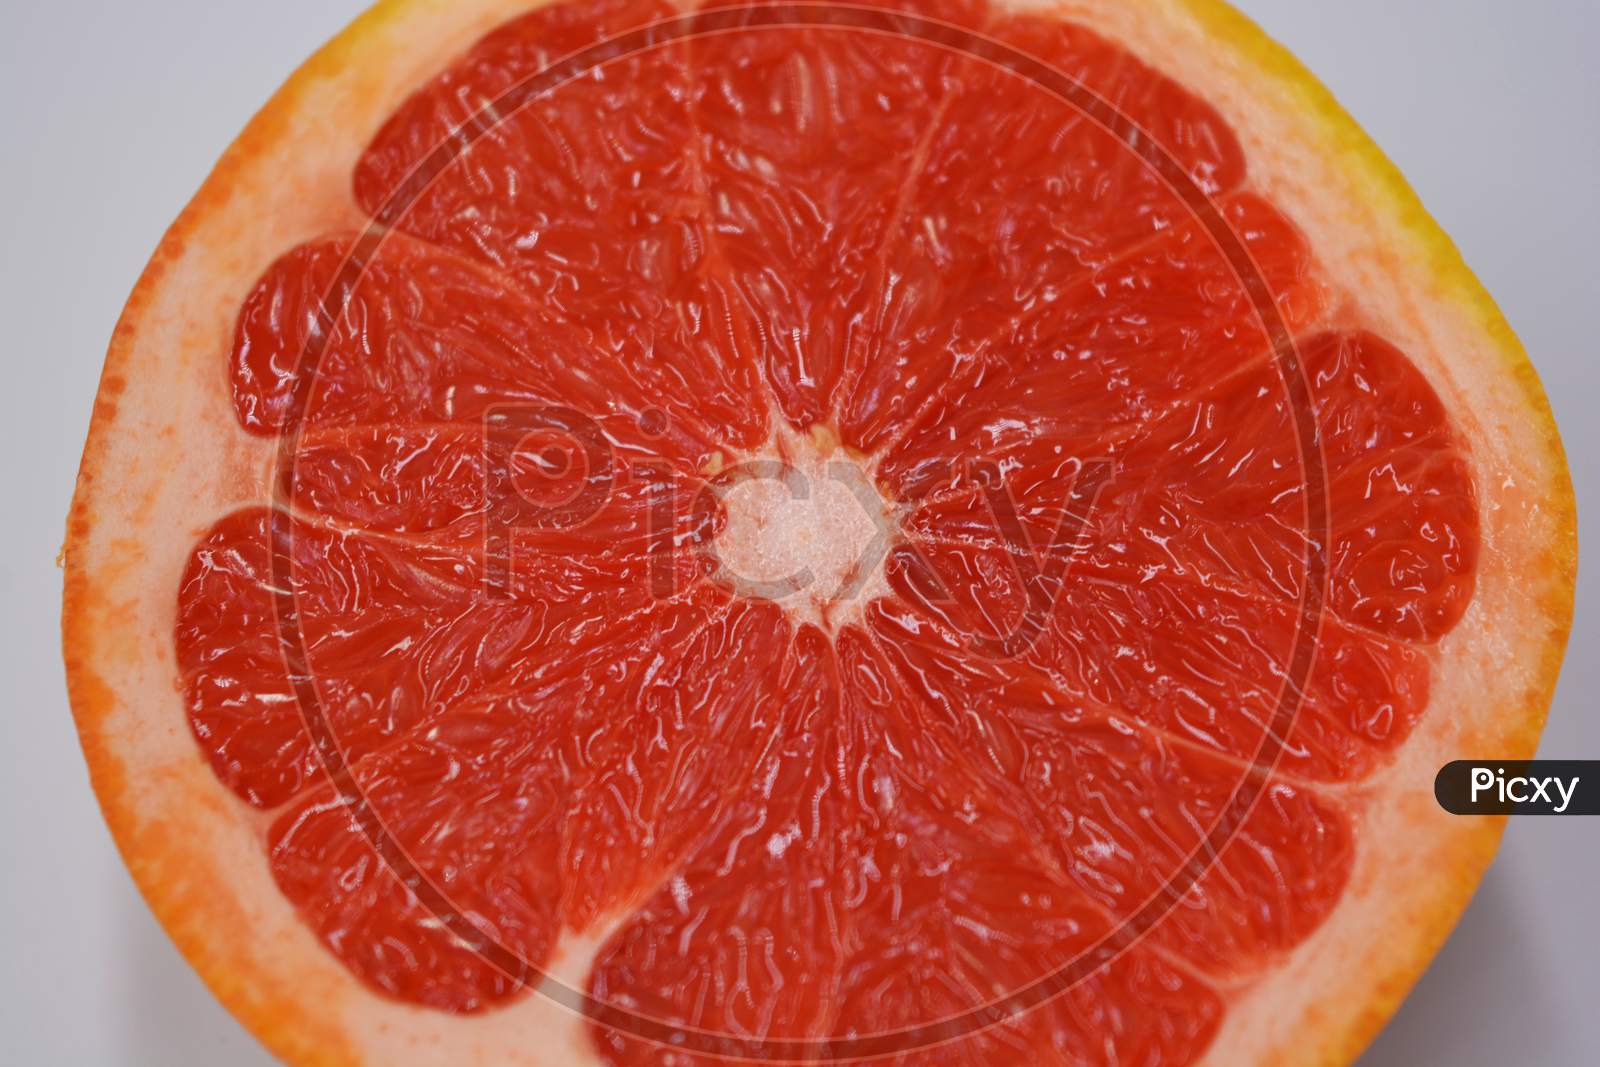 Ripe and tasty fruits, fresh grapefruit cut in half, sliced grapefruit set on a green fabric background.